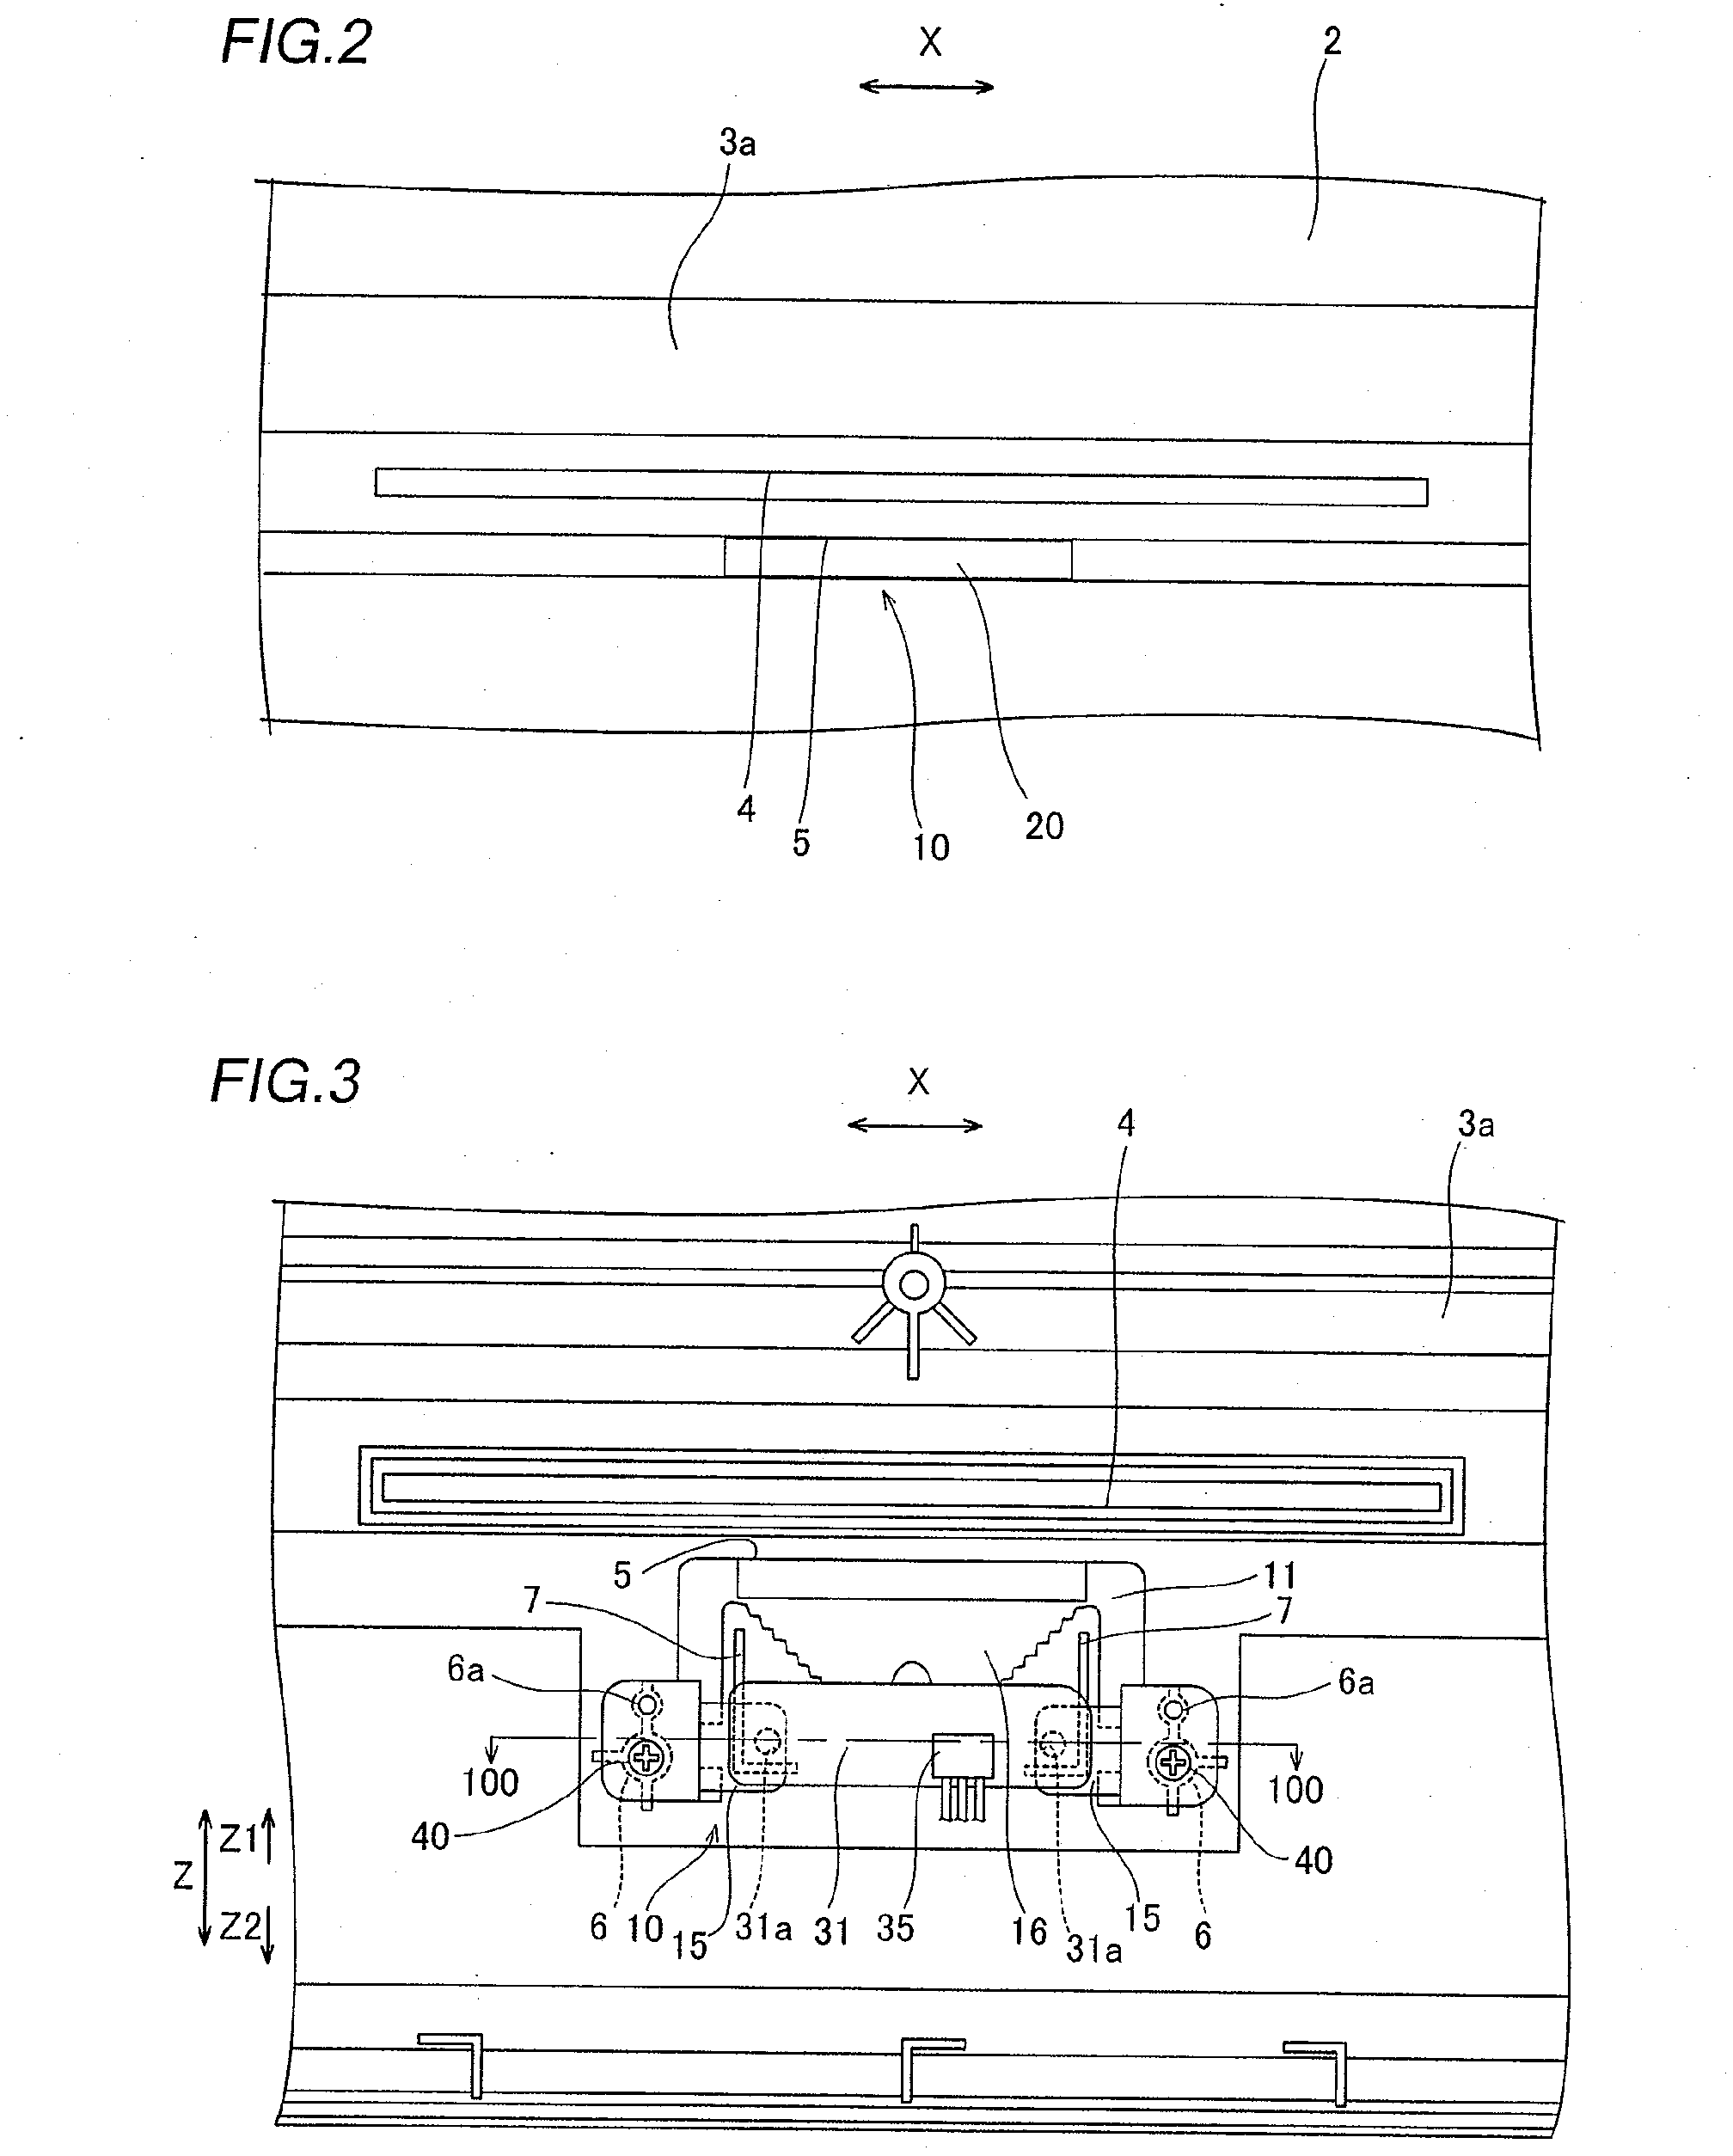 Structure for Mounting Indicator Unit on Electronic Apparatus